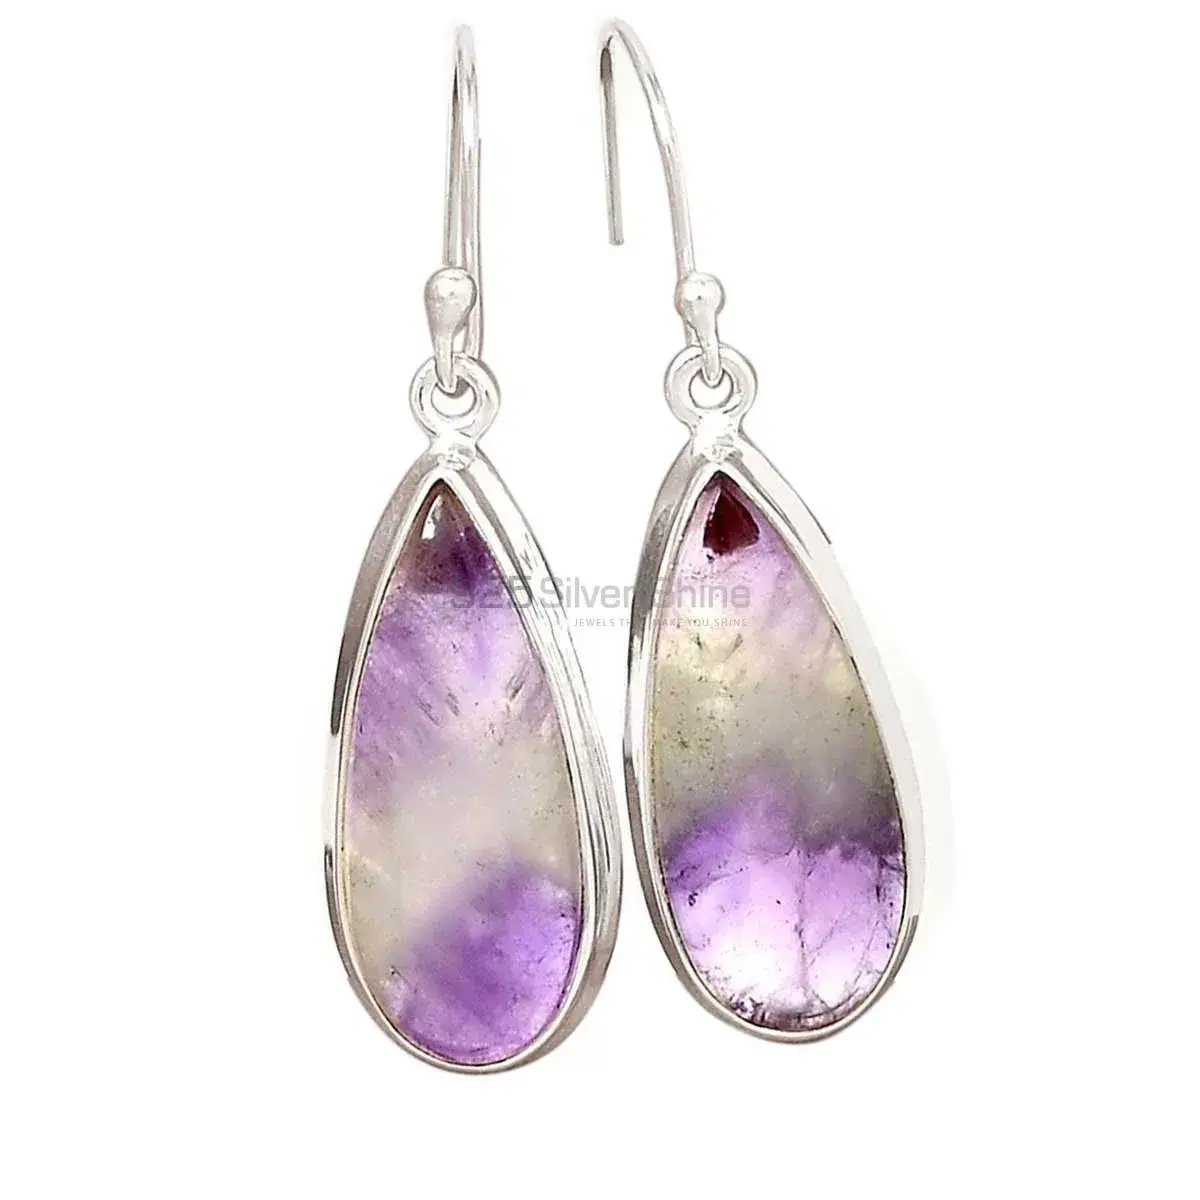 Inexpensive 925 Sterling Silver Earrings Wholesaler In Amethyst Lace agate Gemstone Jewelry 925SE2705_4